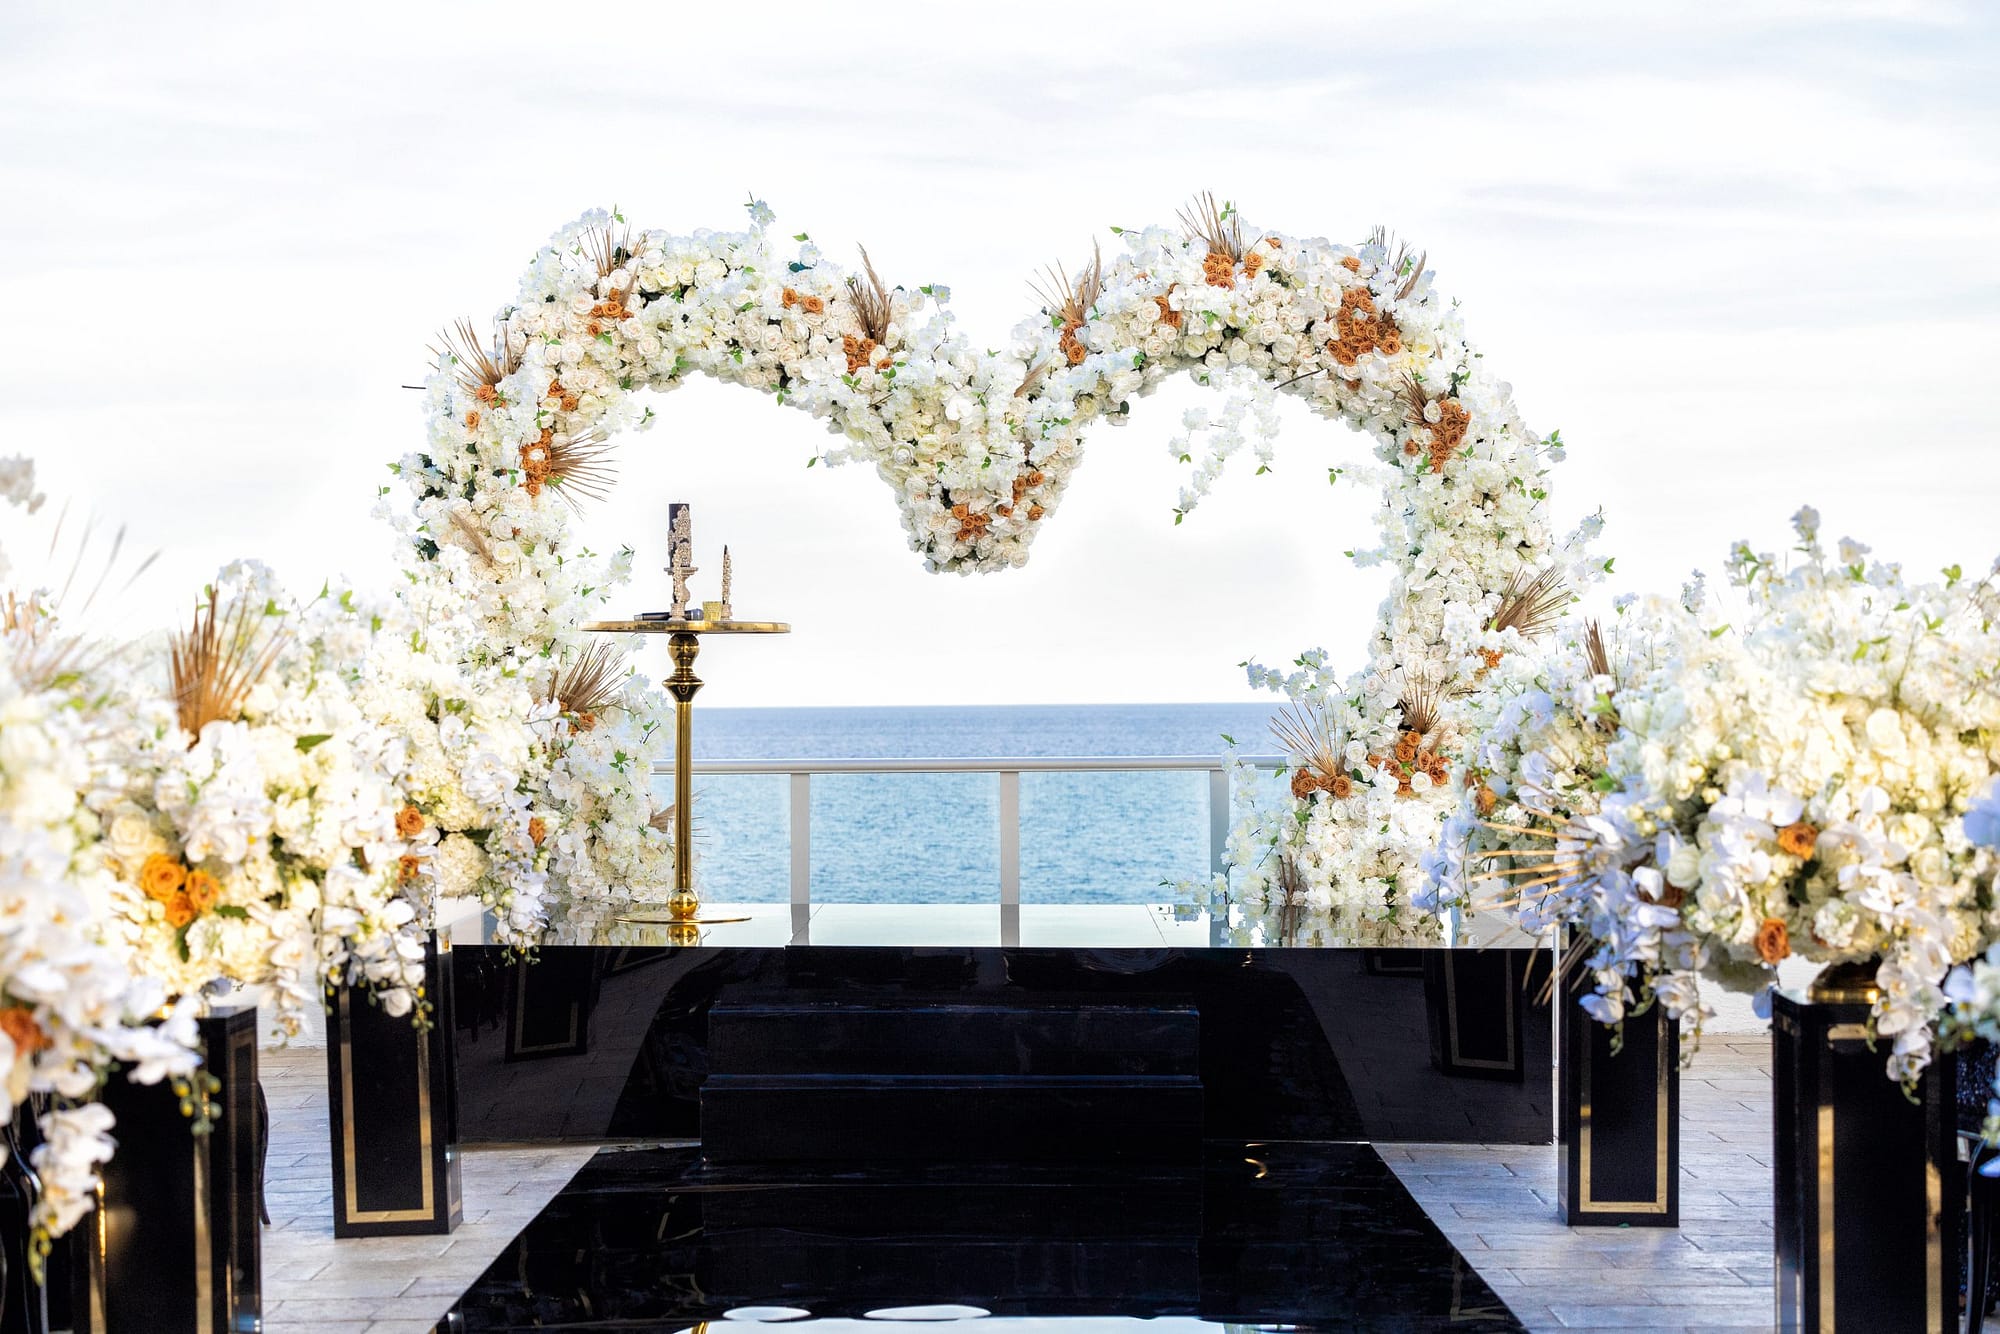 Black Wedding Ceremony Decor with White and Orange Floral Arrangements | Heart Shaped Floral Arch 